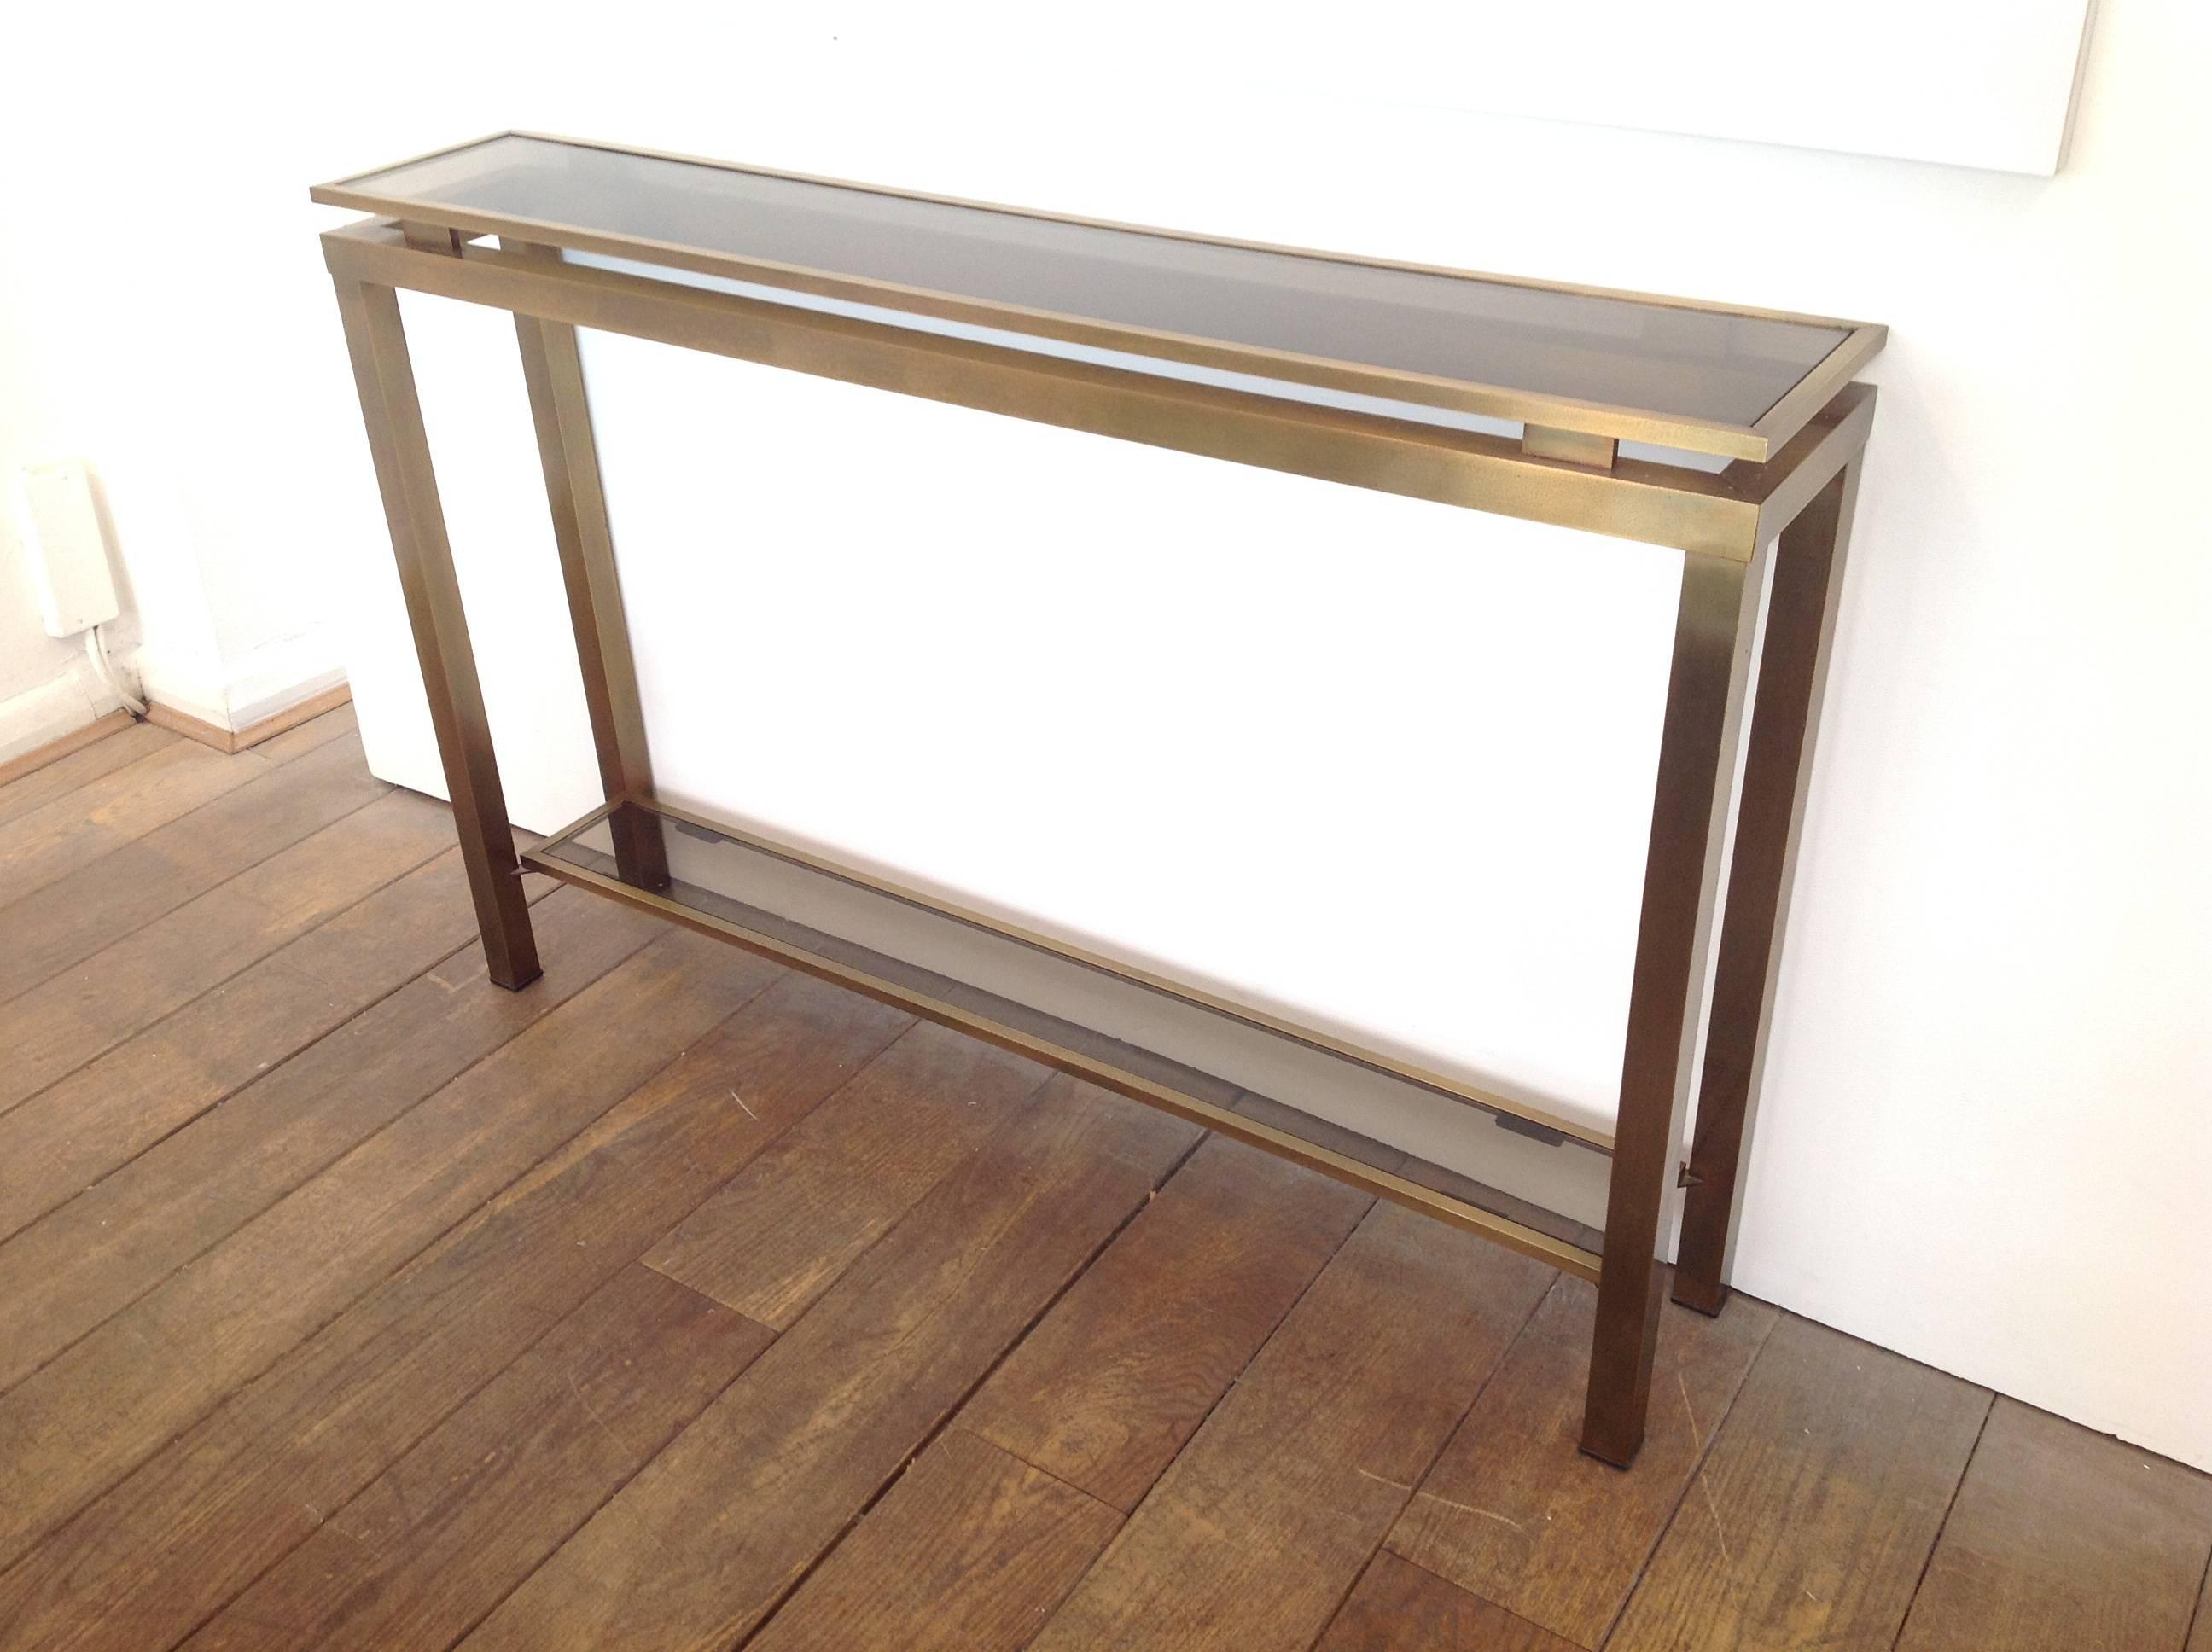 A Guy Lefevre console table with gilt metal double edged frame and two smoked glass shelves. Also available is matching Guy Lefevre mirror and coffee table.